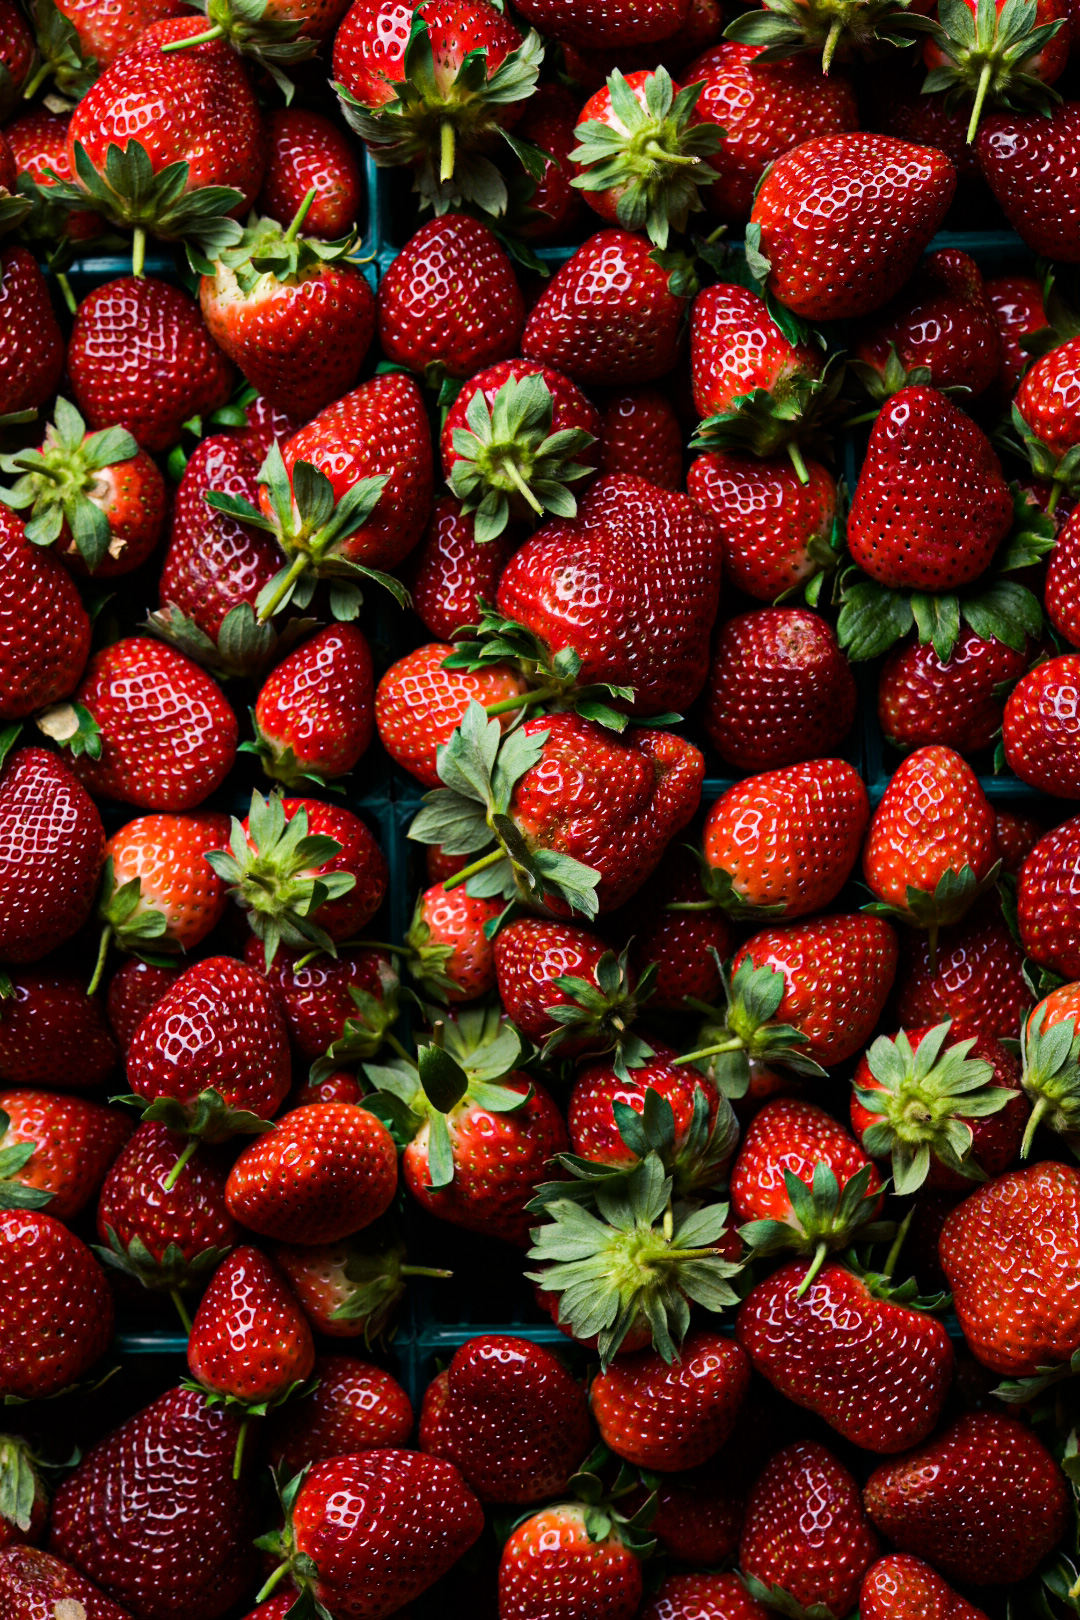 A flat of strawberries purchased from Landry-Poché Family Farms